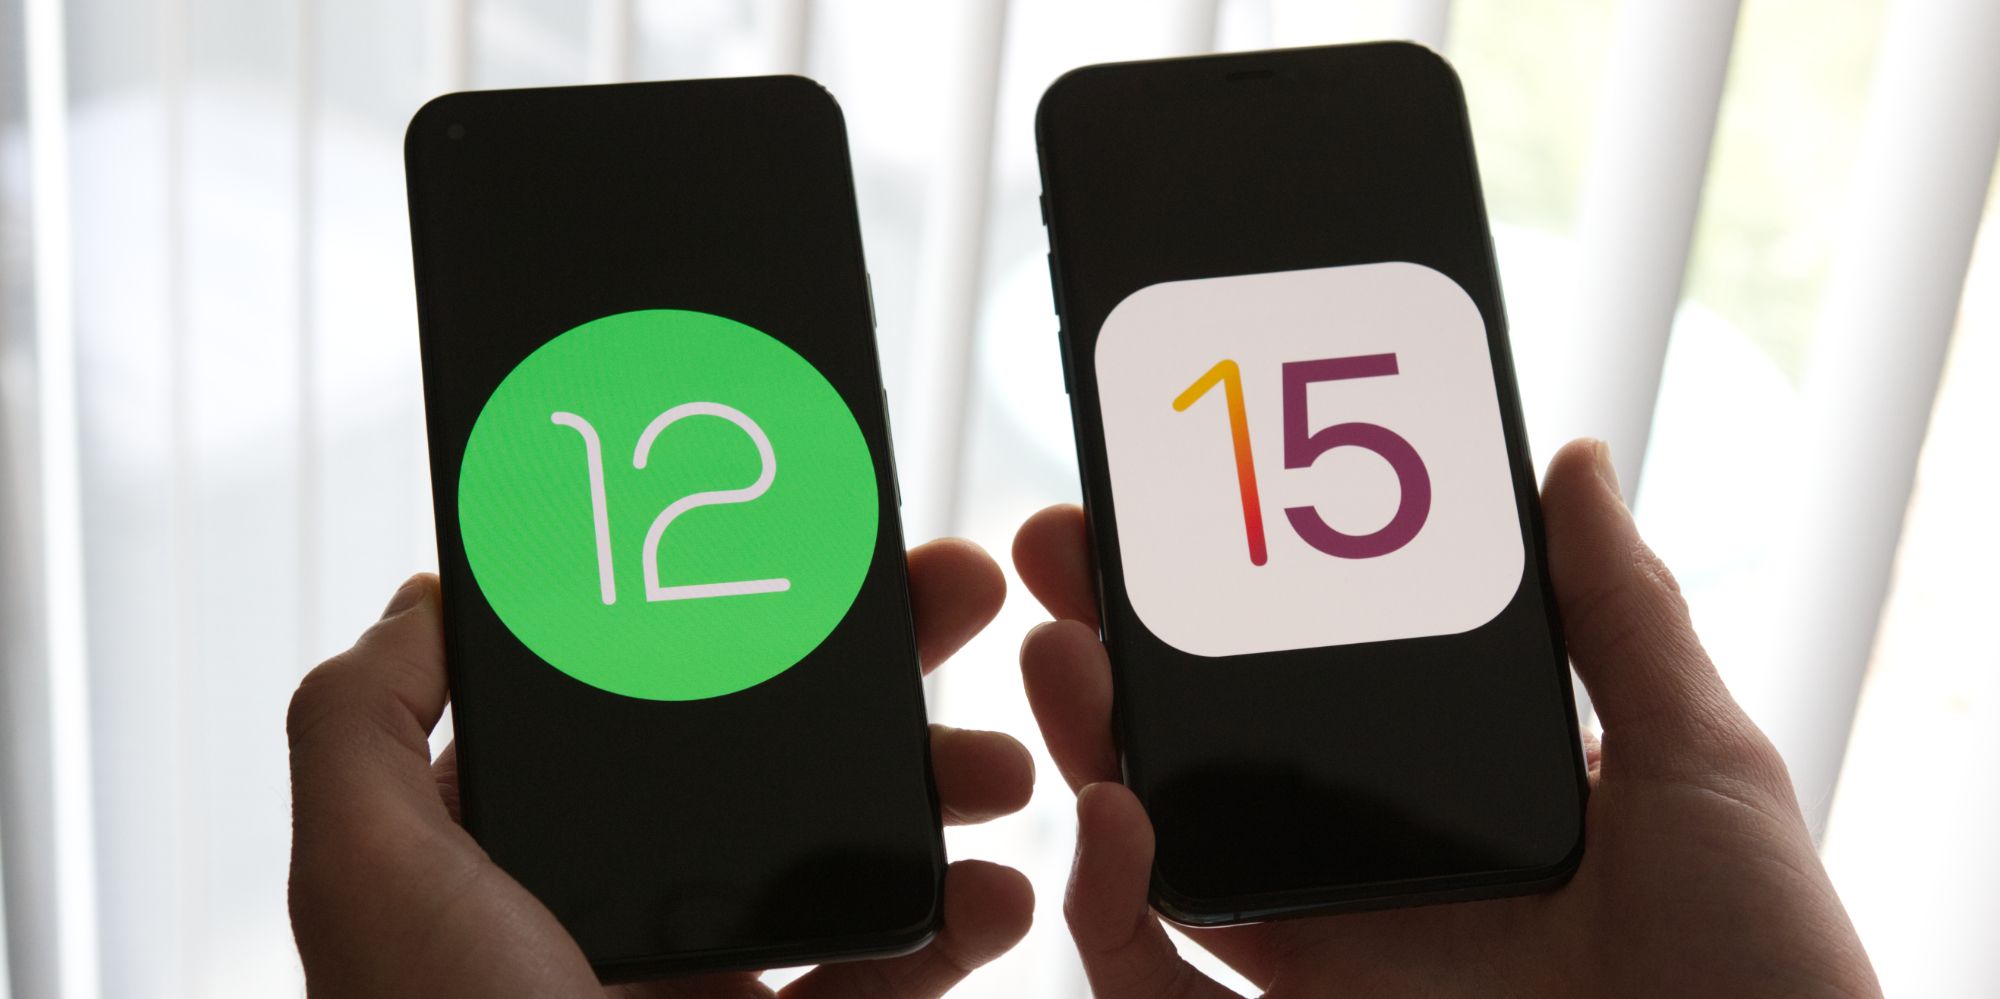 Android 12 and iOS 15 icons on a Pixel and iPhone